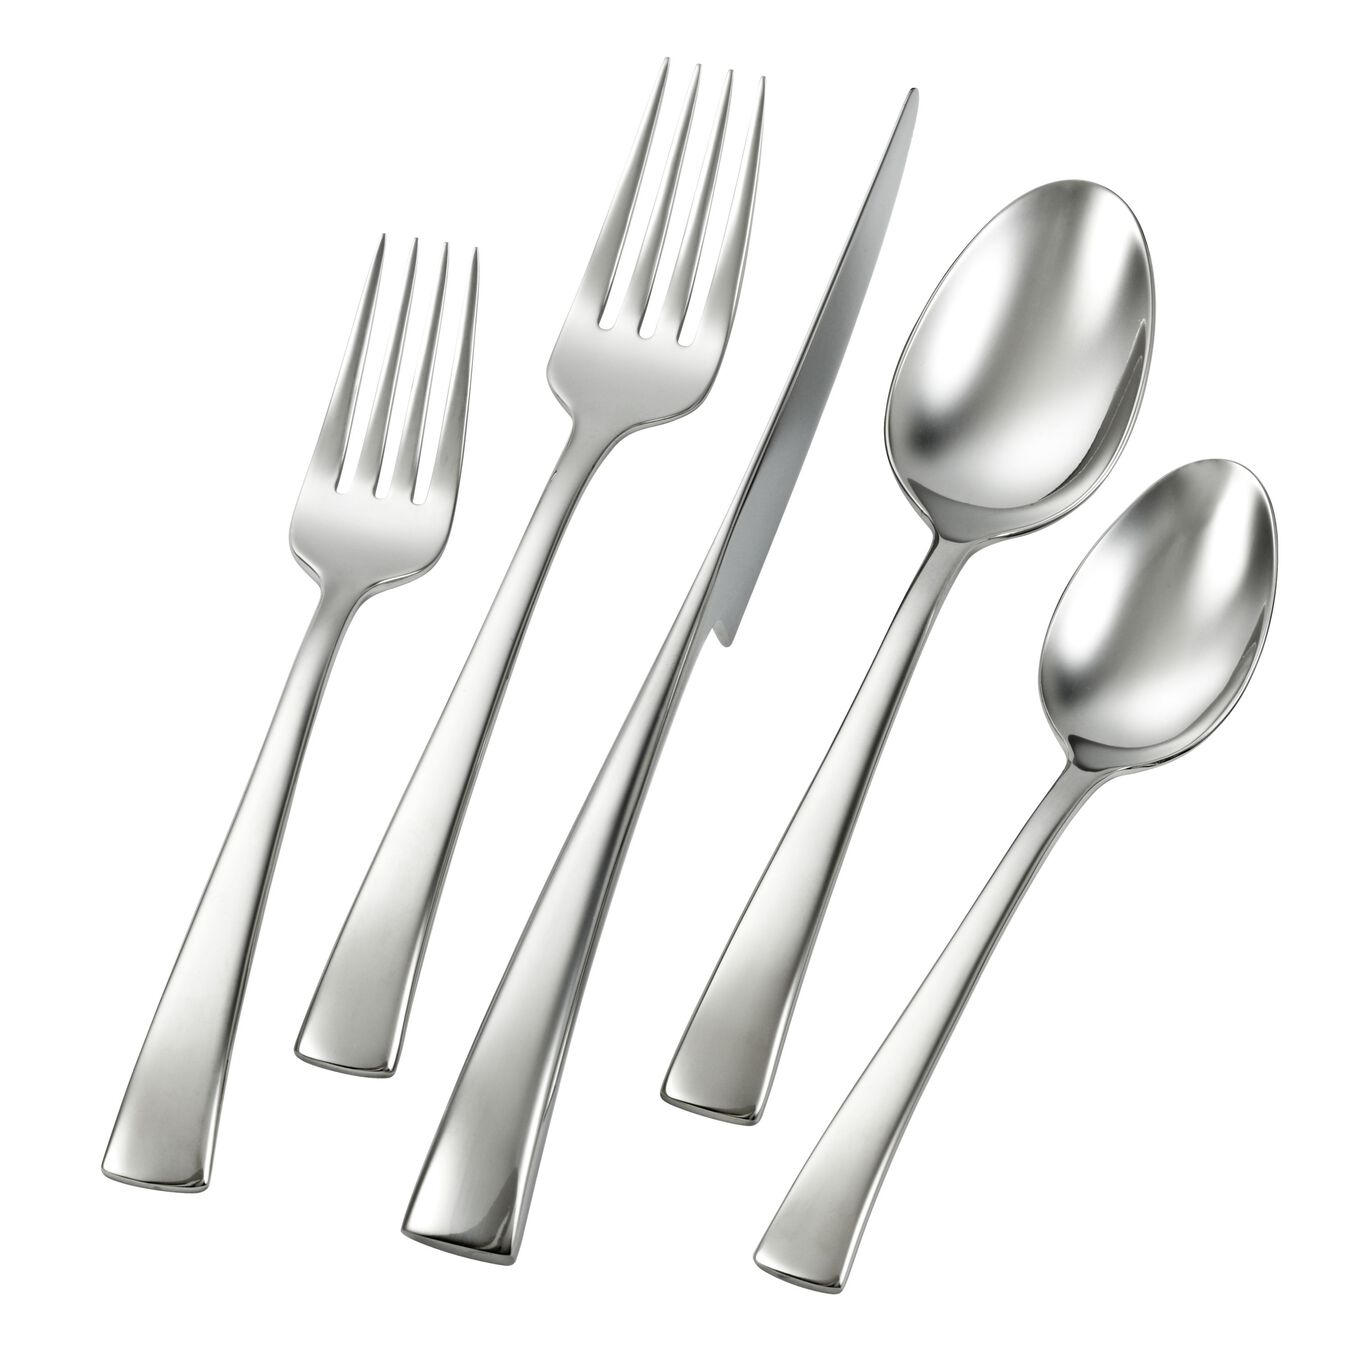 23-pc Flatware Set, 18/10 Stainless Steel,,large 1